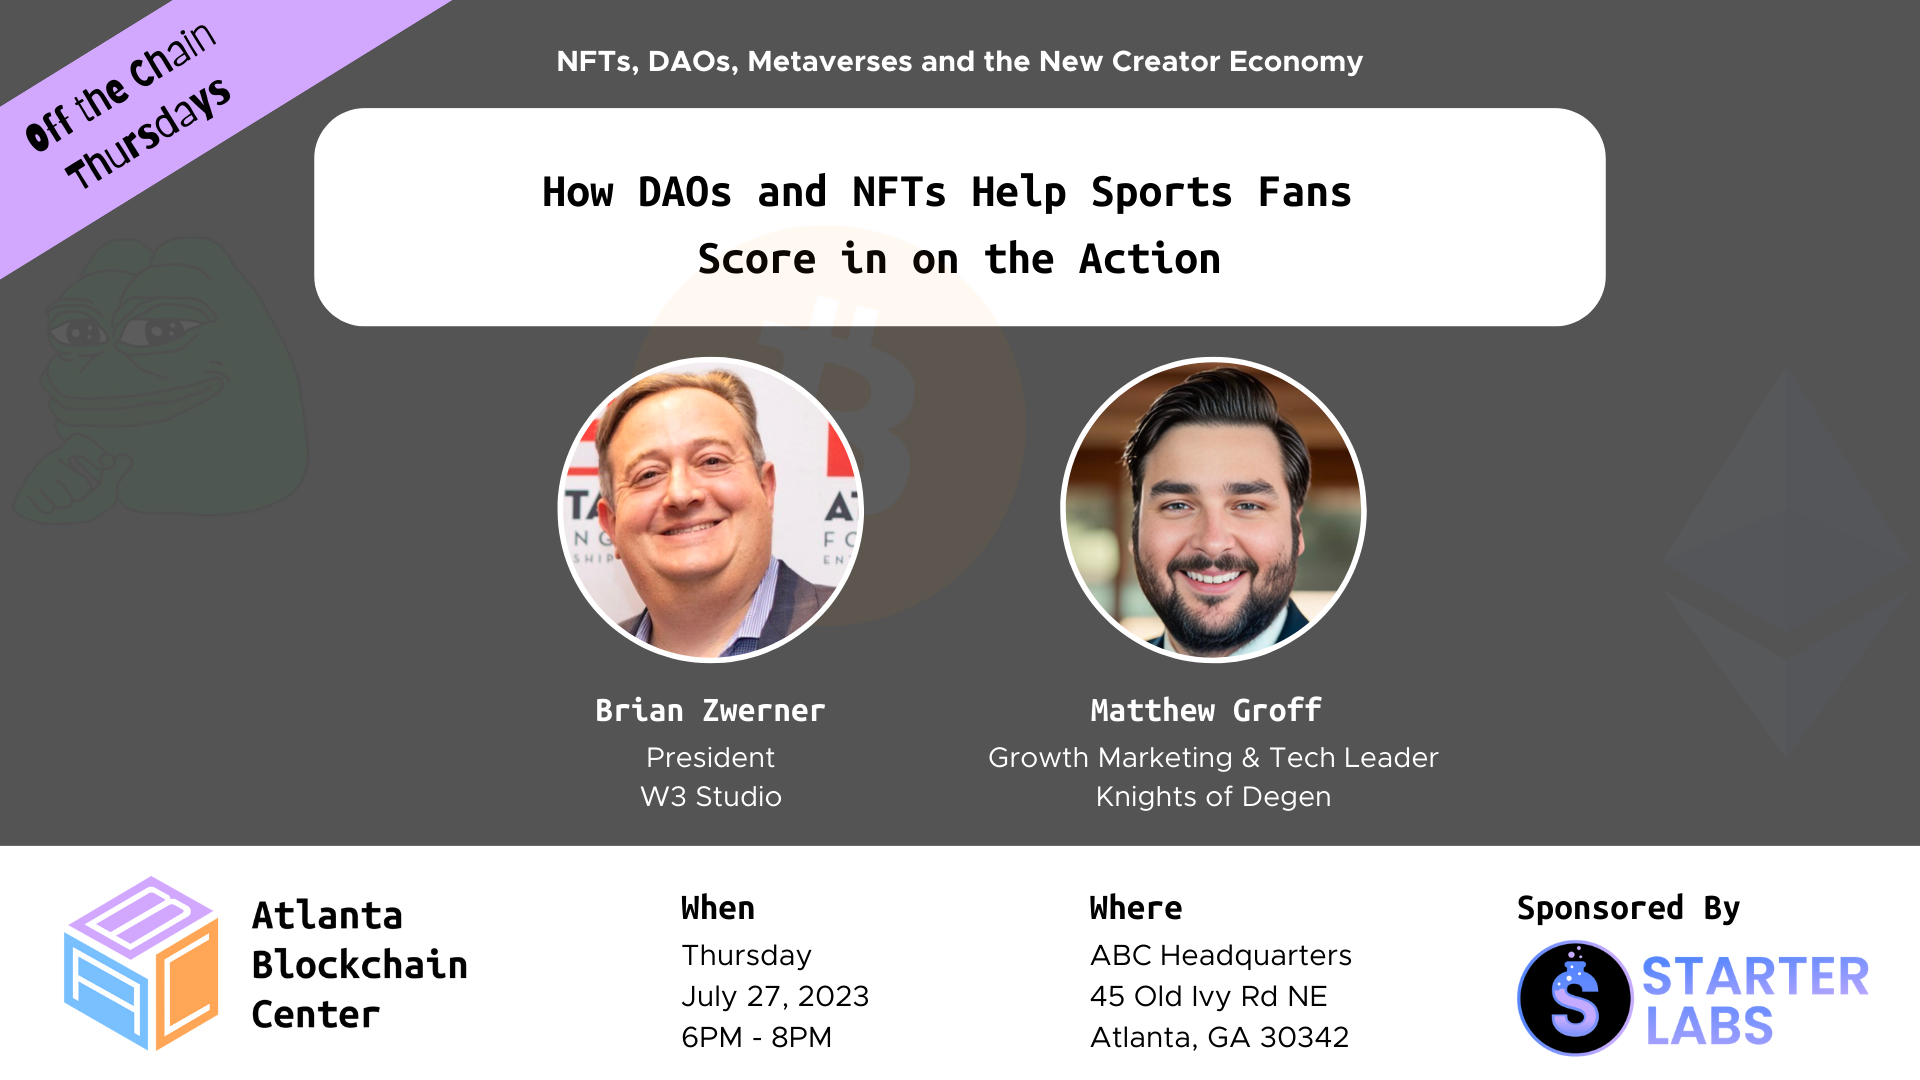 How DAOs and NFTs Help Sports Fans Score in on the Action